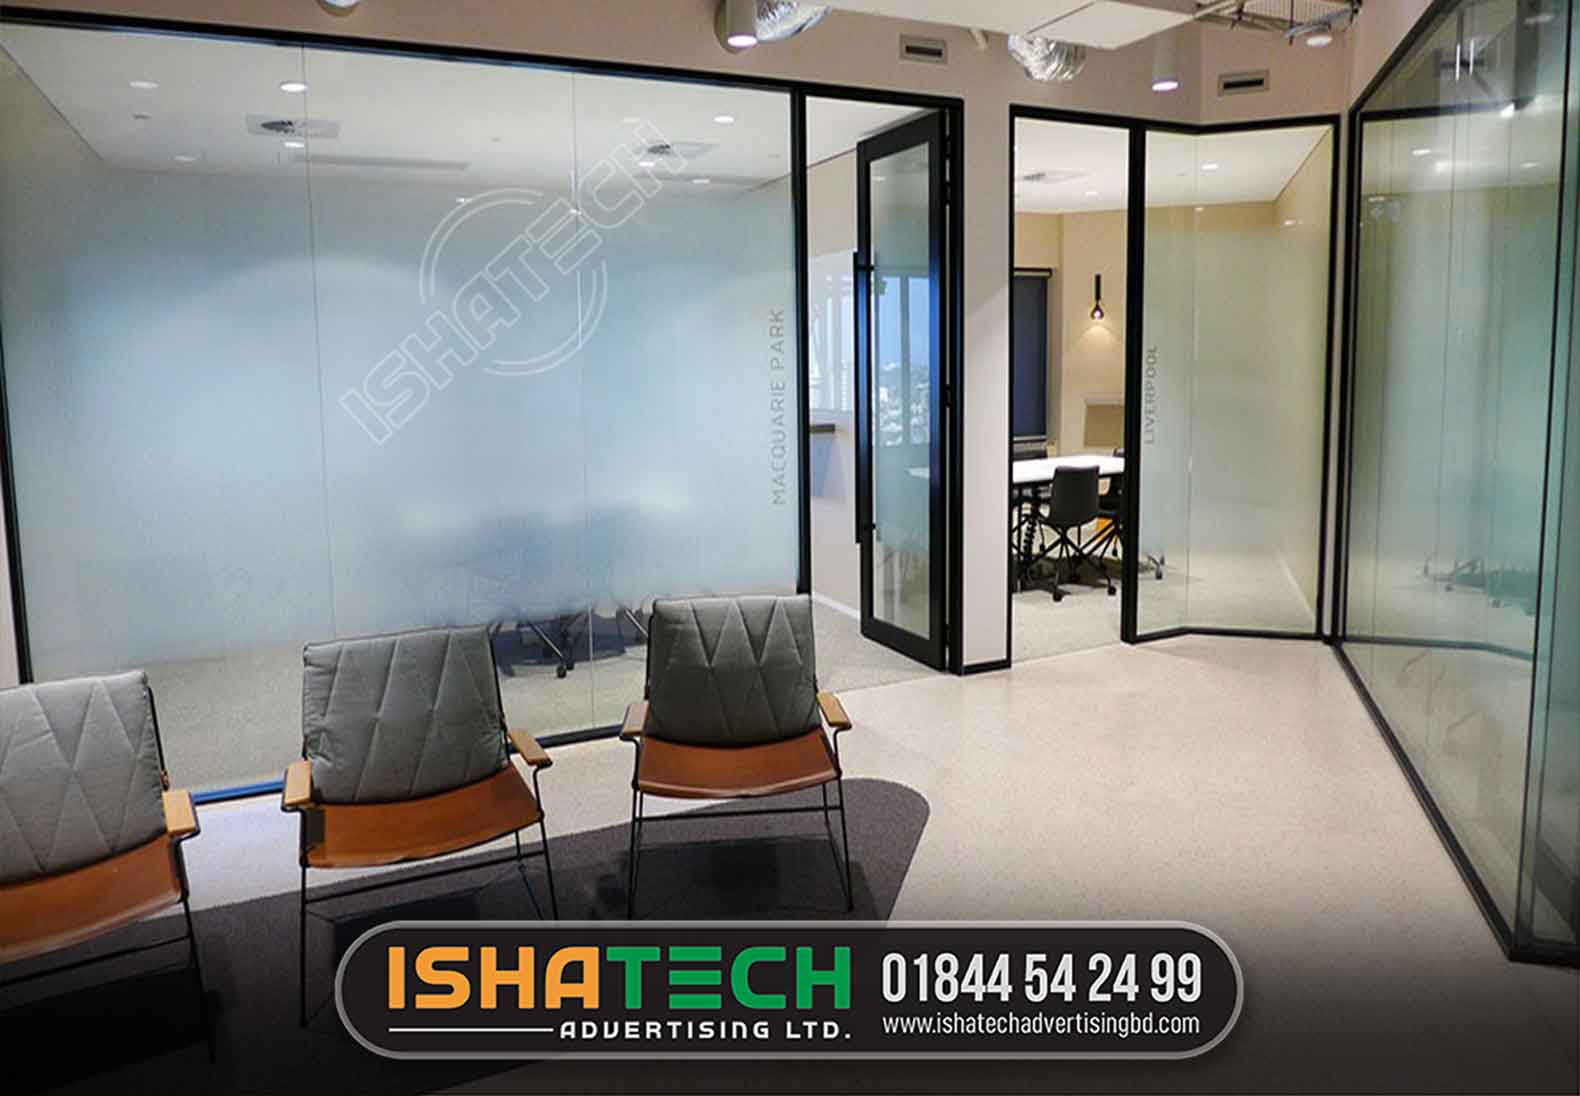 Custom Glass Stickers Printing Online, wall design, frosted glass sticker, window stickers, Decorative Window & Wall Home Stickers